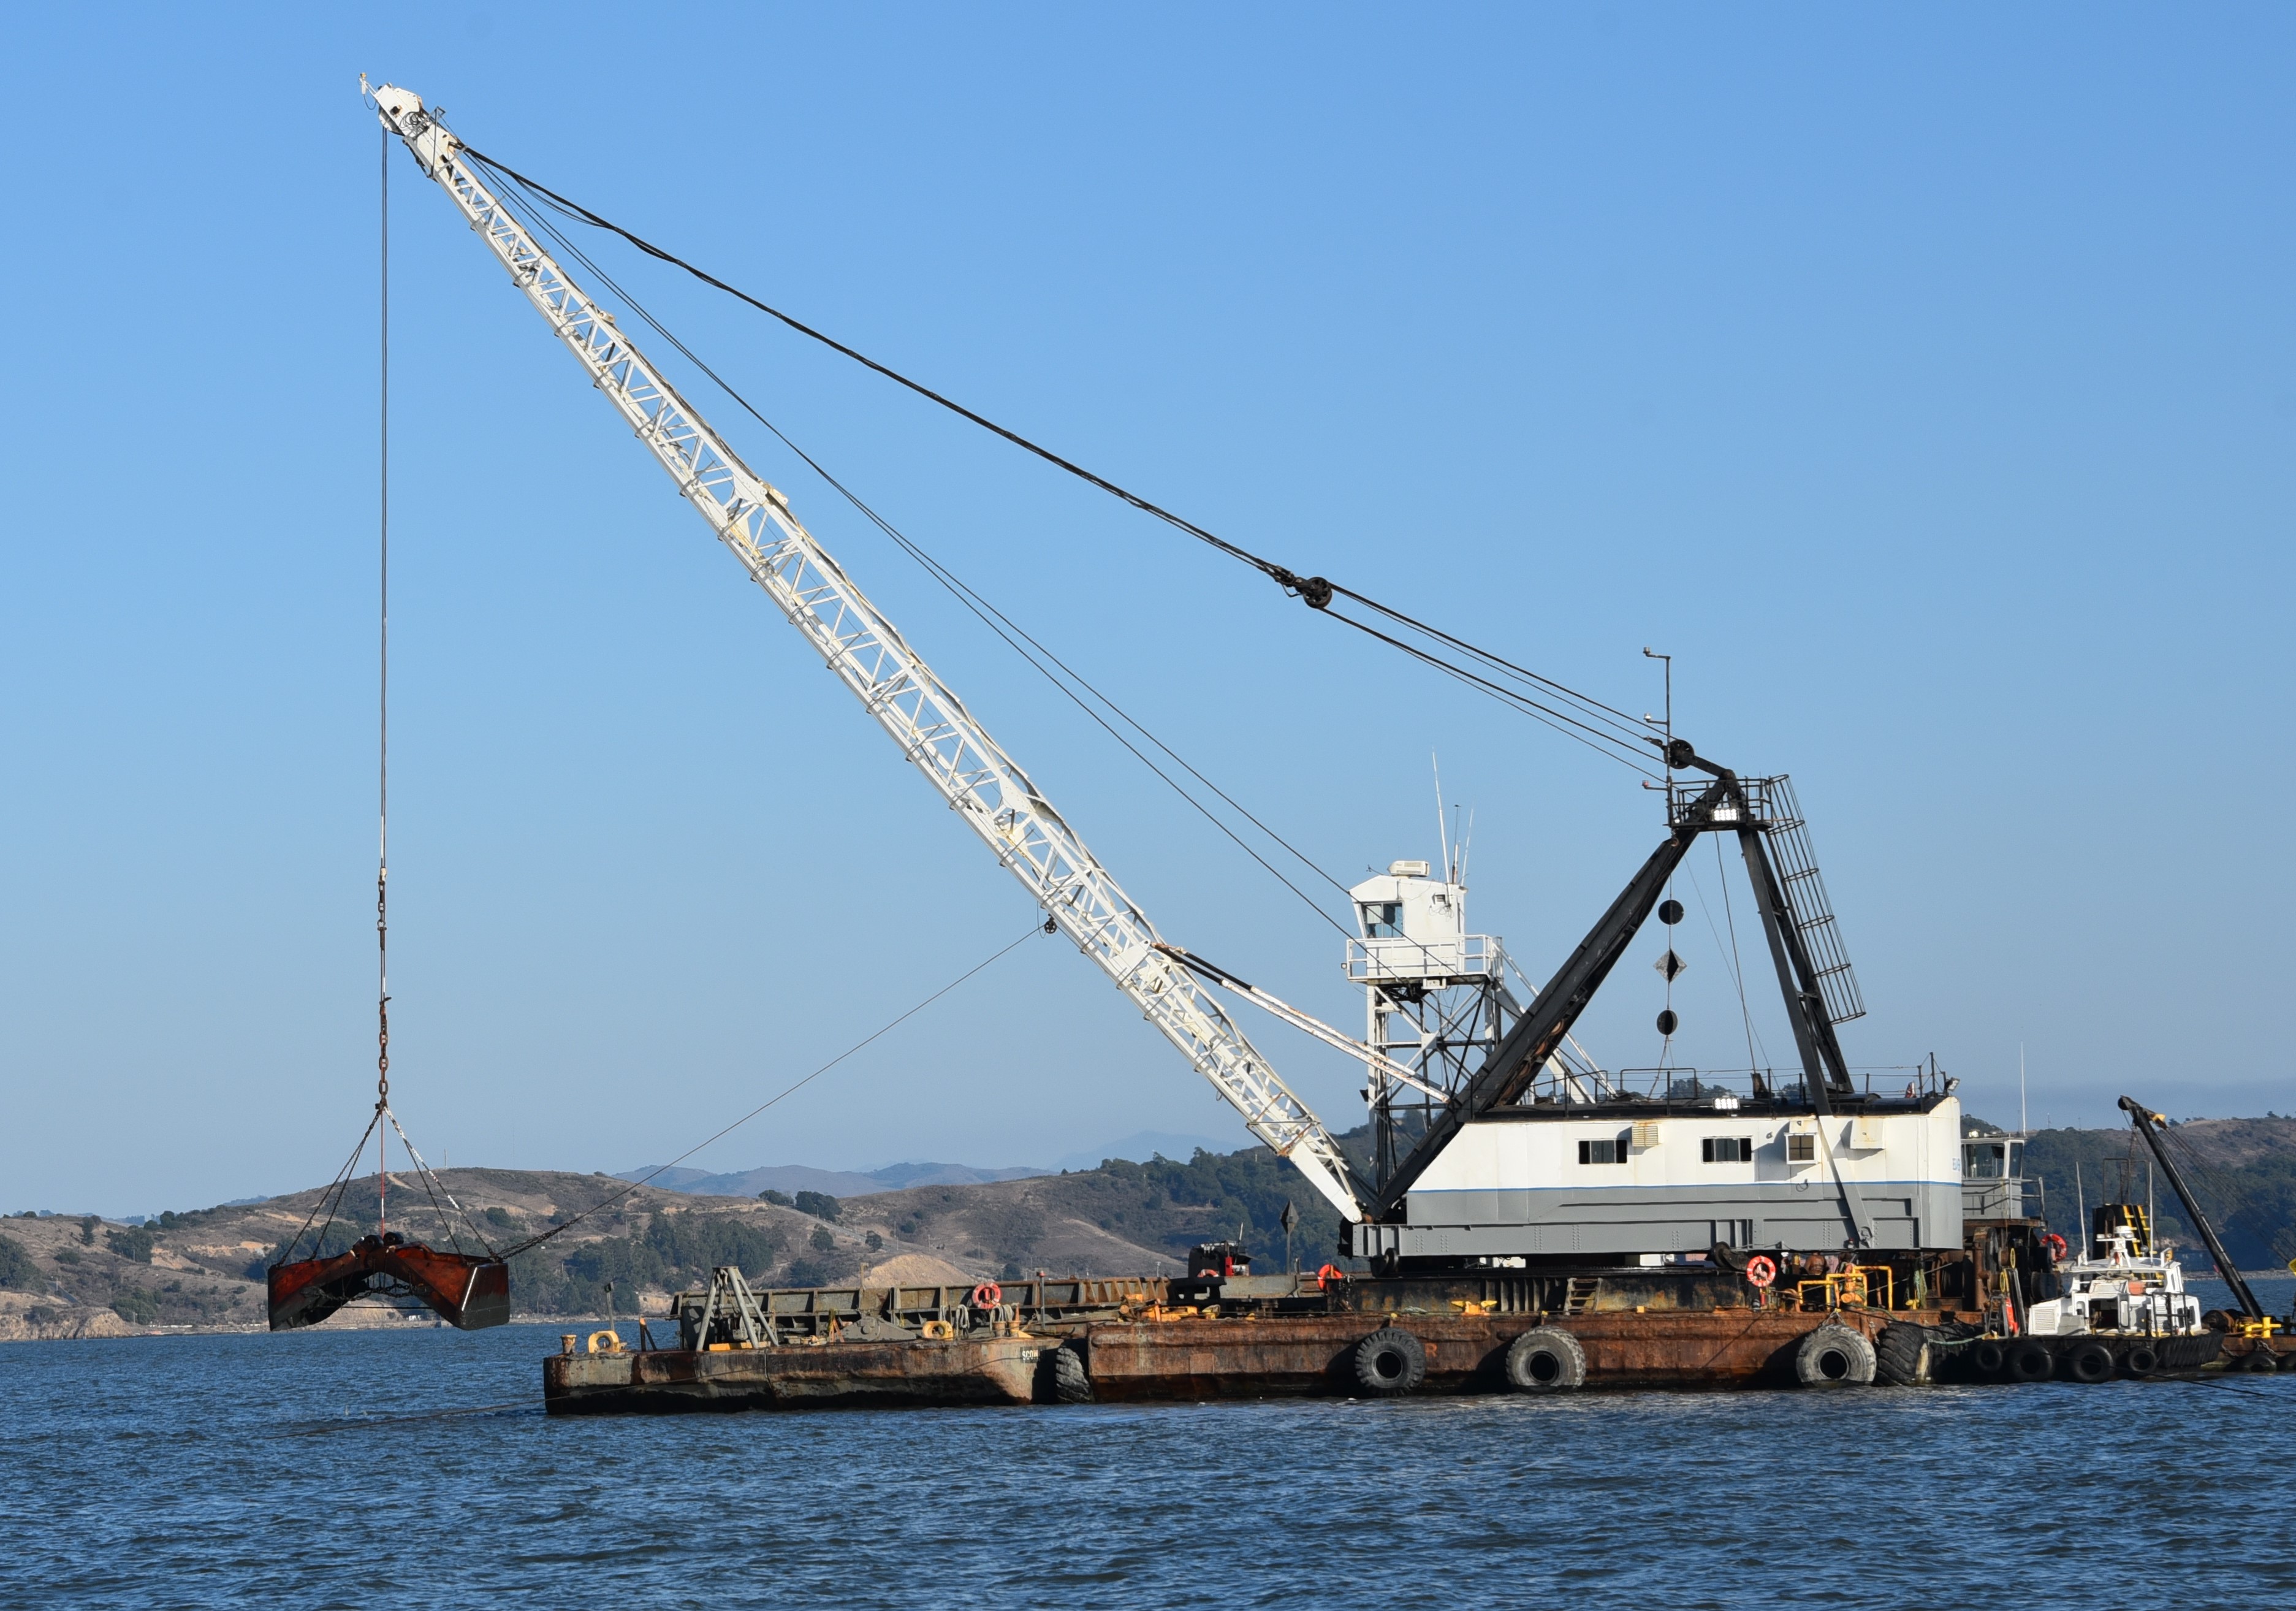 Dredge with open clamshell on the water with hills in the background